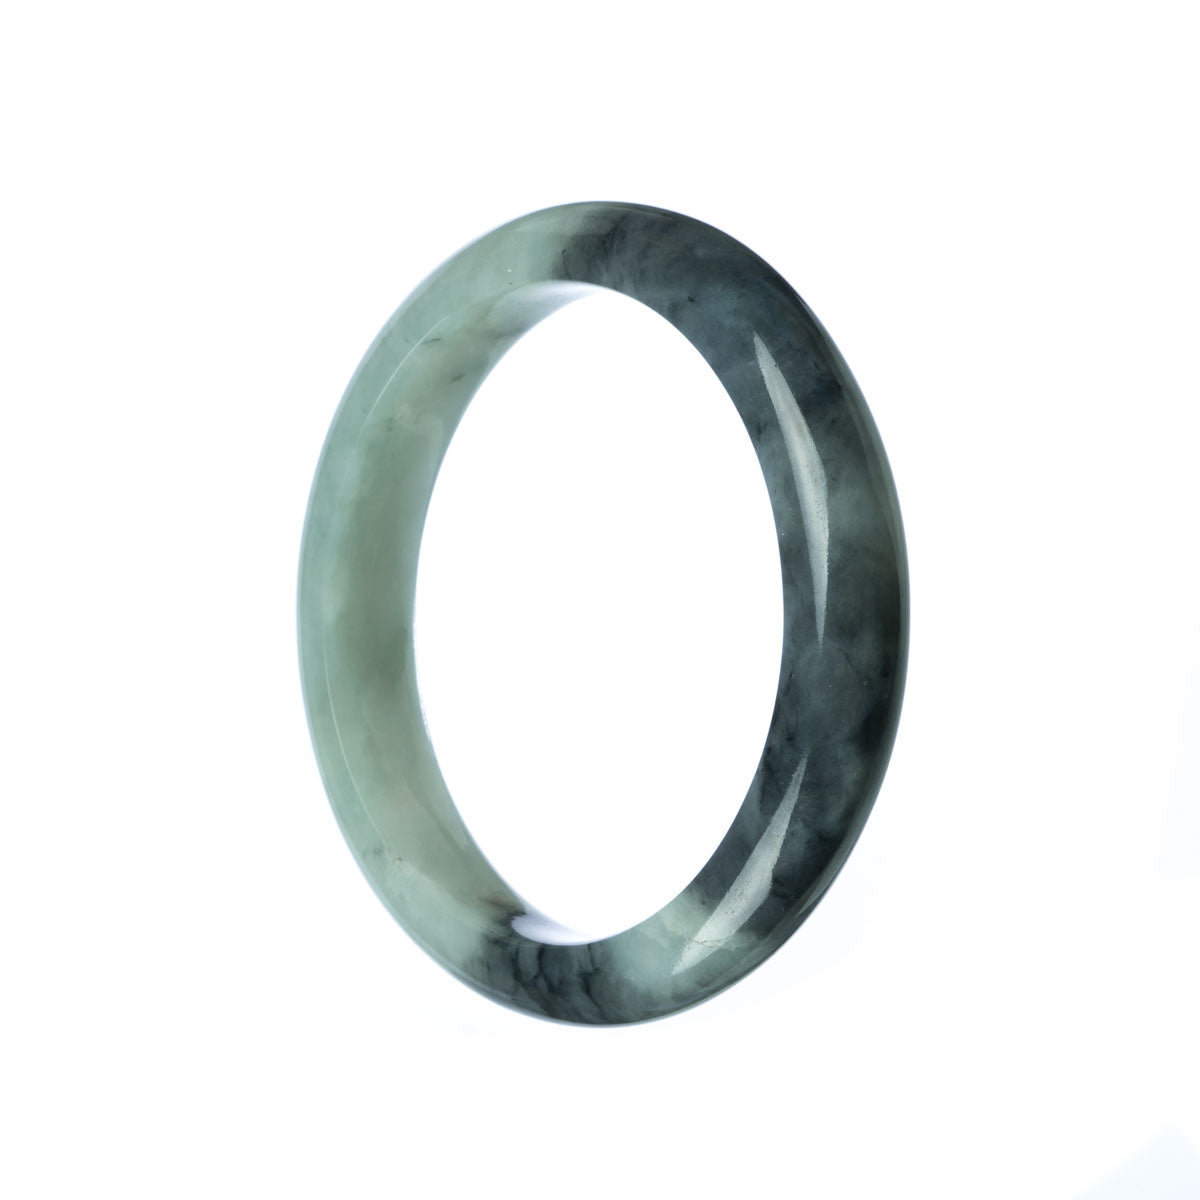 A stunning grey jade bracelet with a semi-round shape, measuring 58mm in size. Crafted from genuine grade A jade, this bracelet from MAYS is a timeless and elegant accessory.